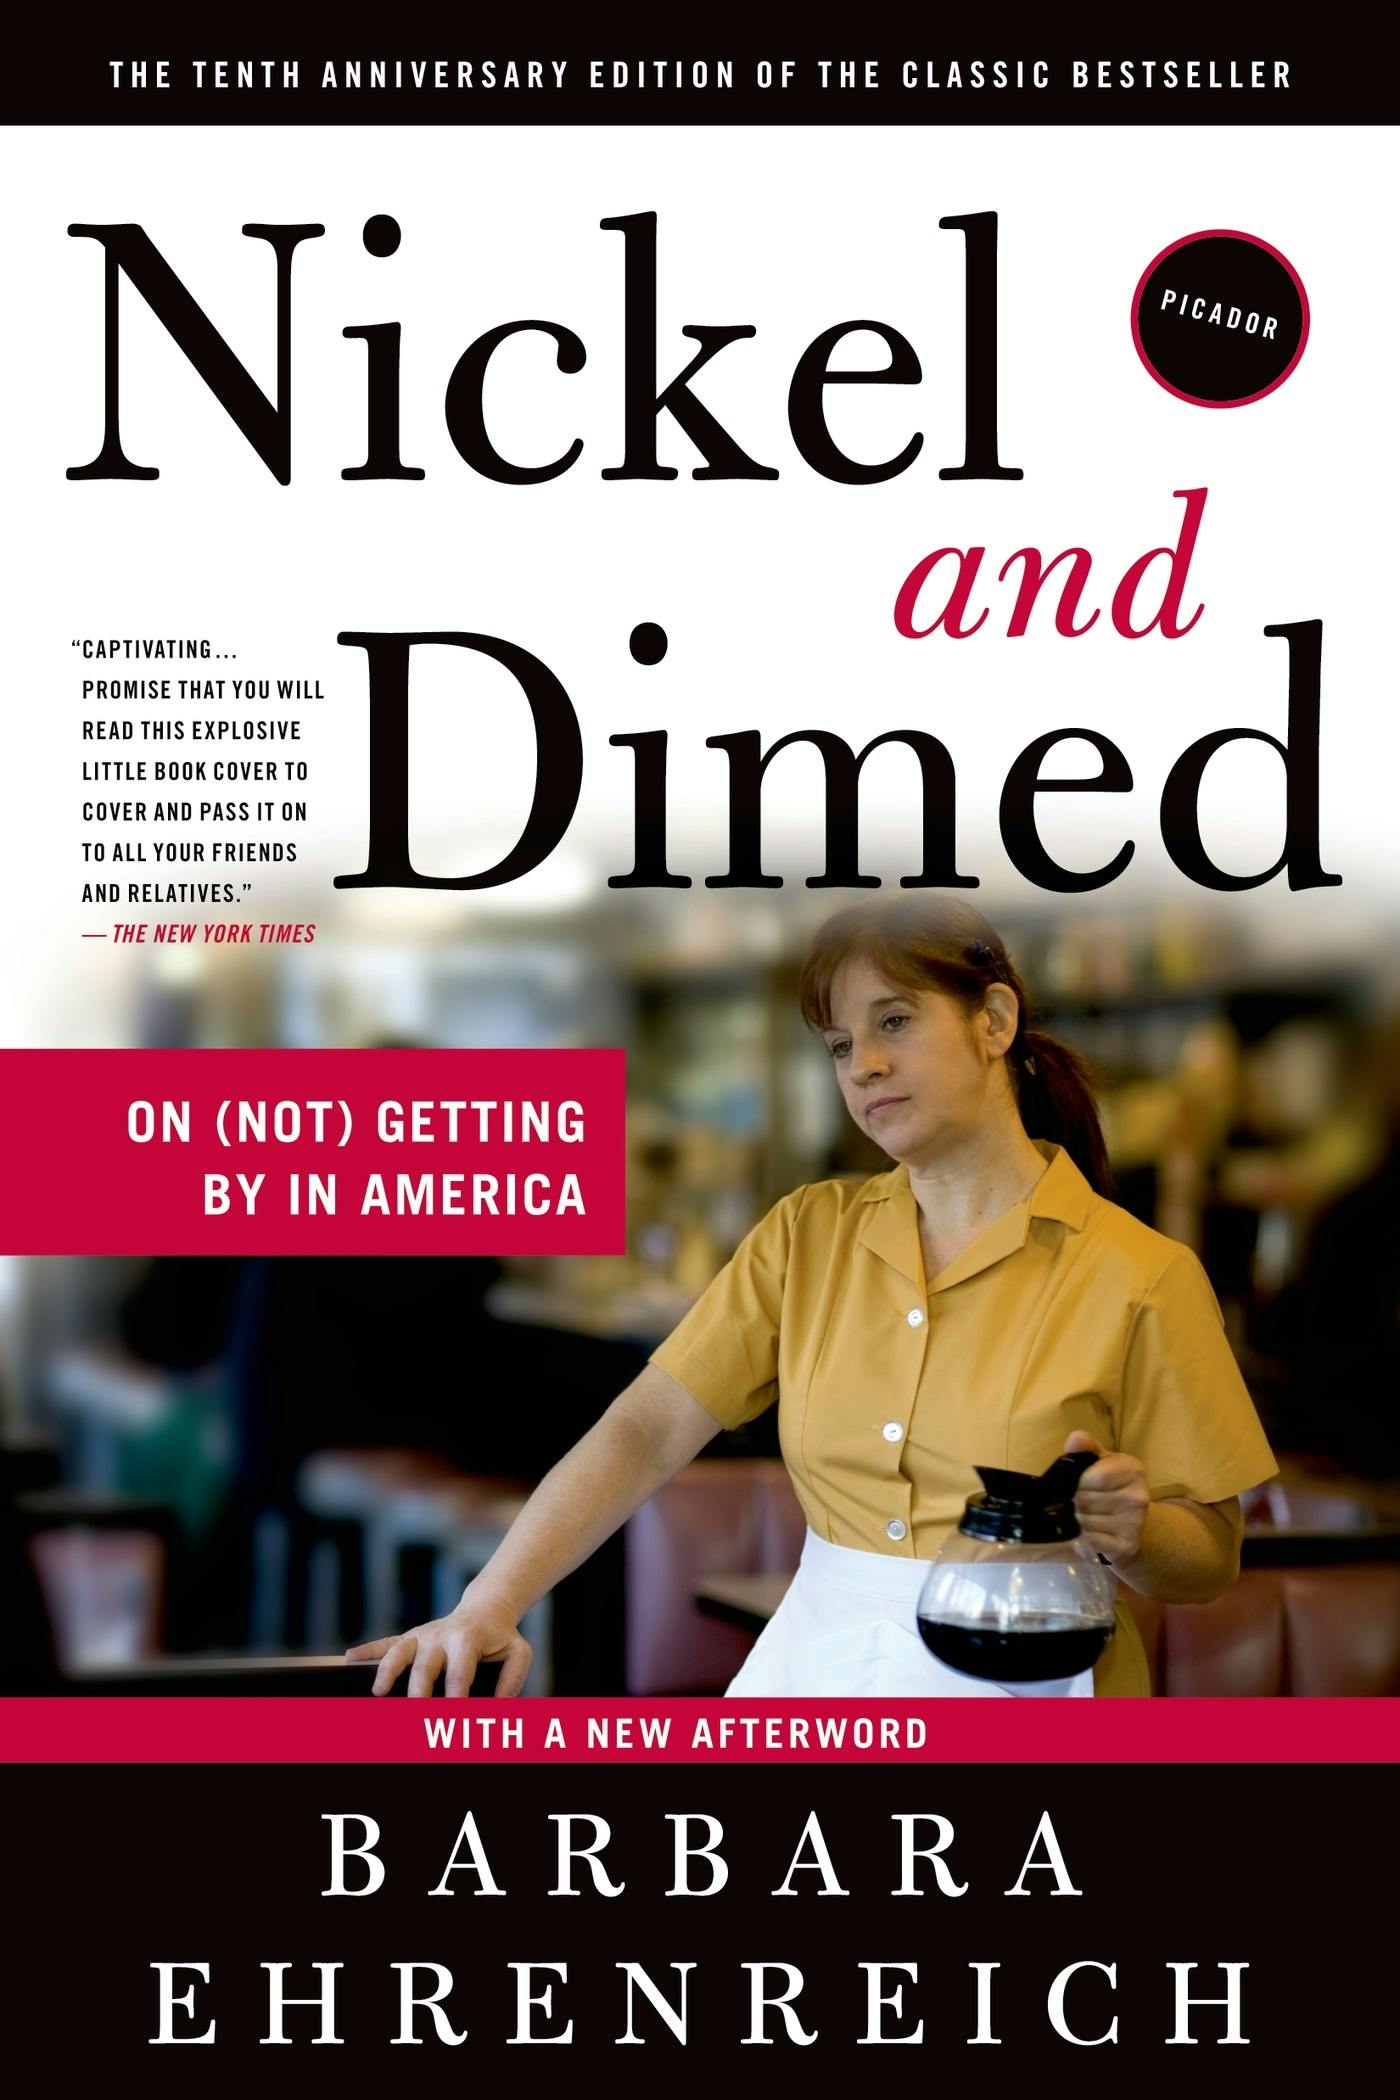 nickel and dimed author